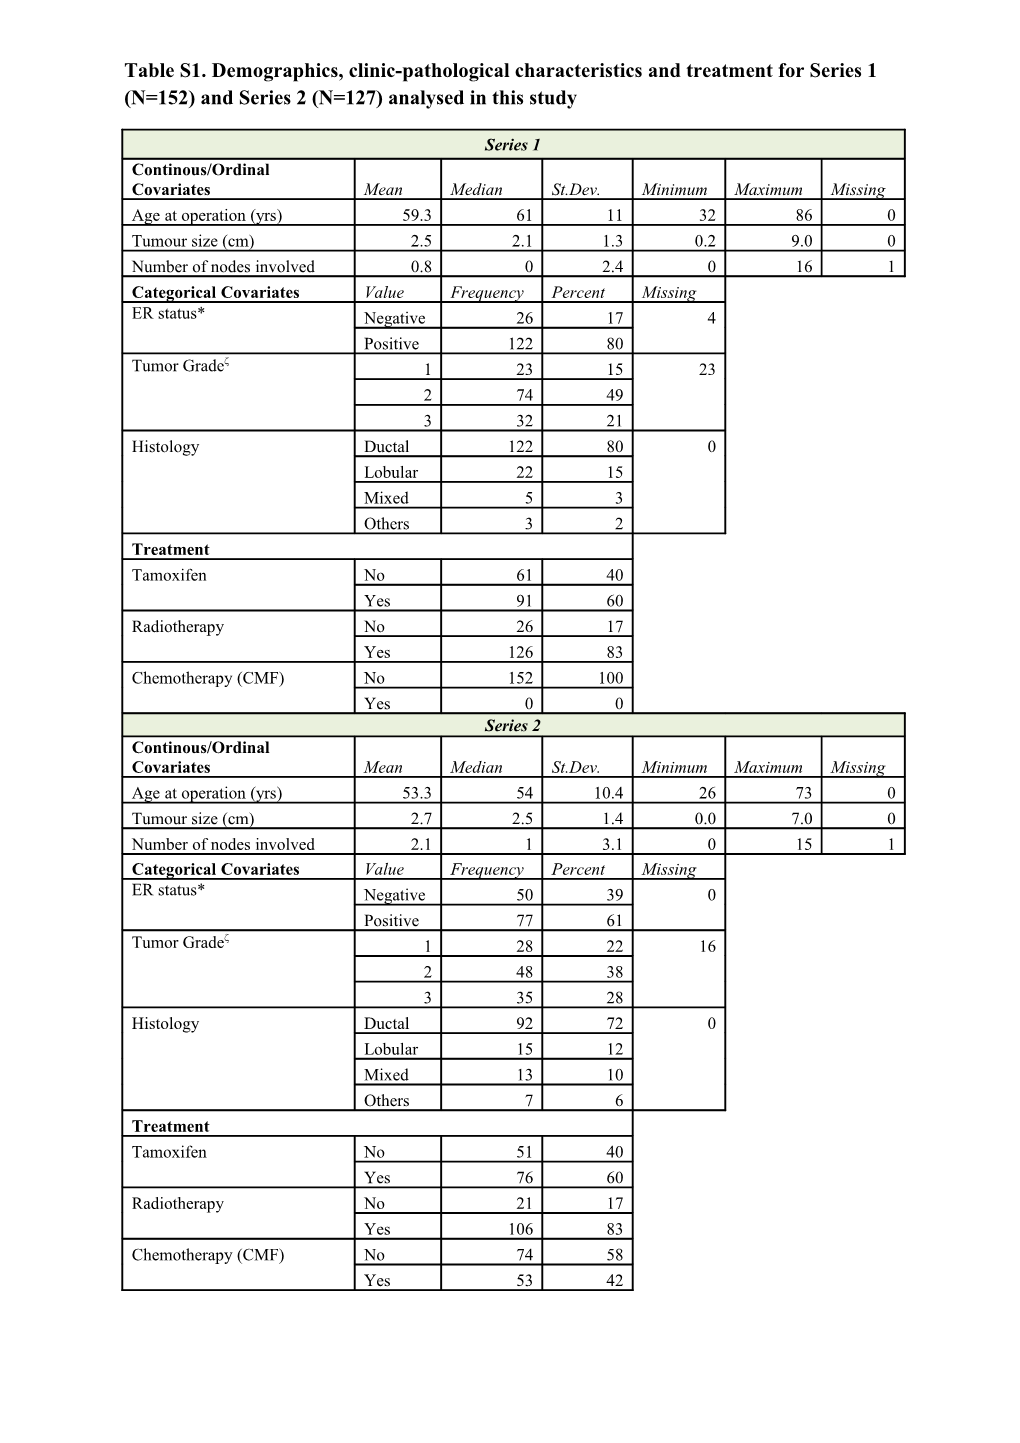 Table S1. Demographics, Clinic-Pathological Characteristics and Treatment for Series 1